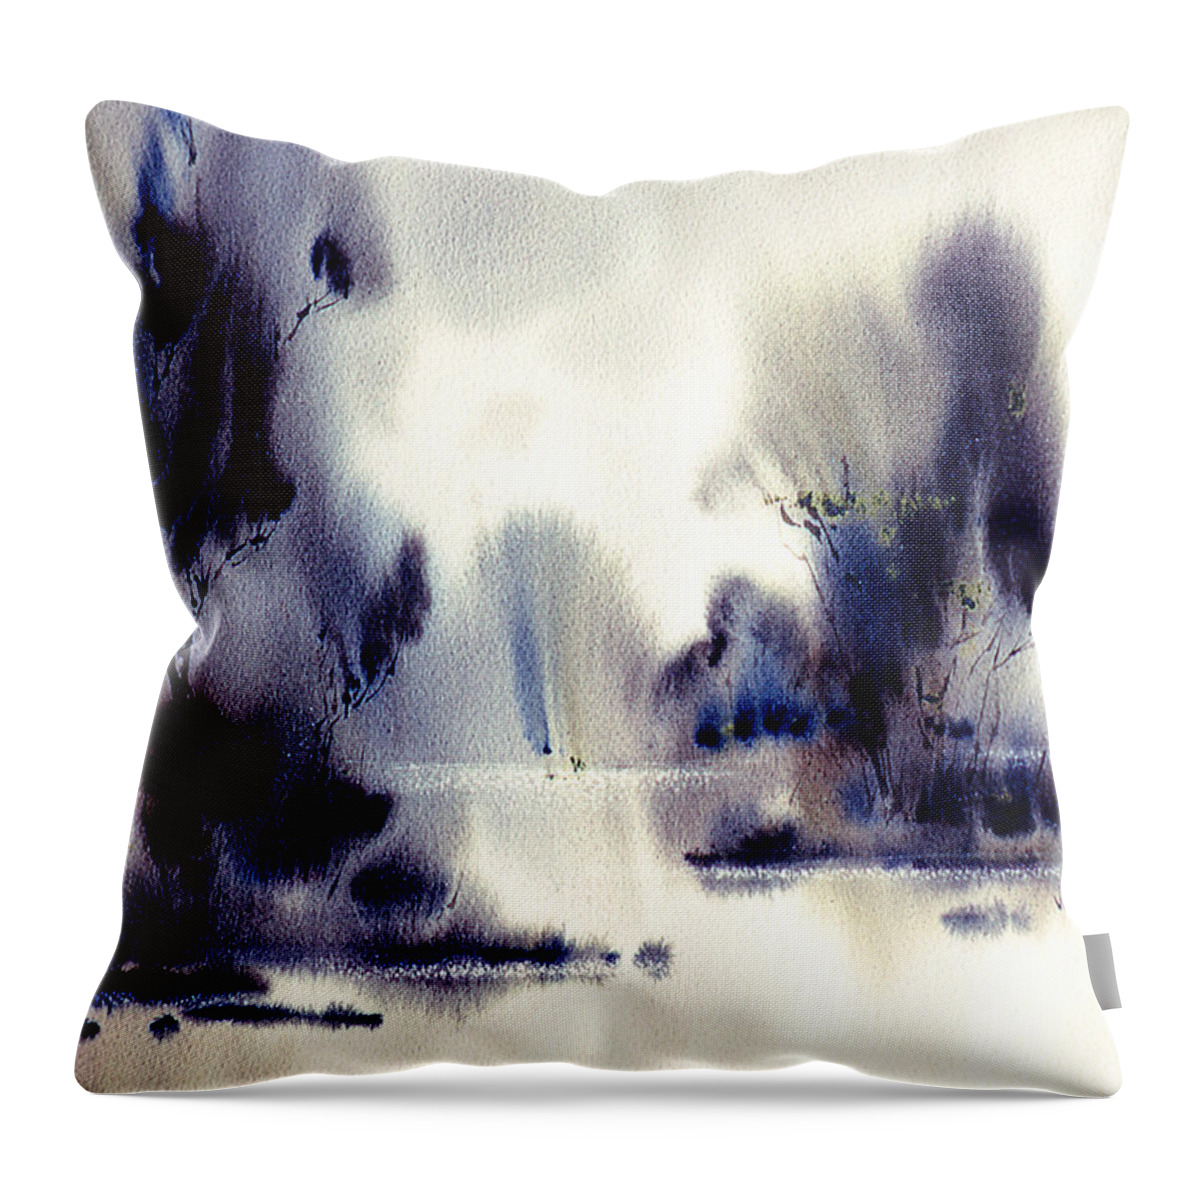 Lake Throw Pillow featuring the painting Eleven Months by Jacob Krapowicz